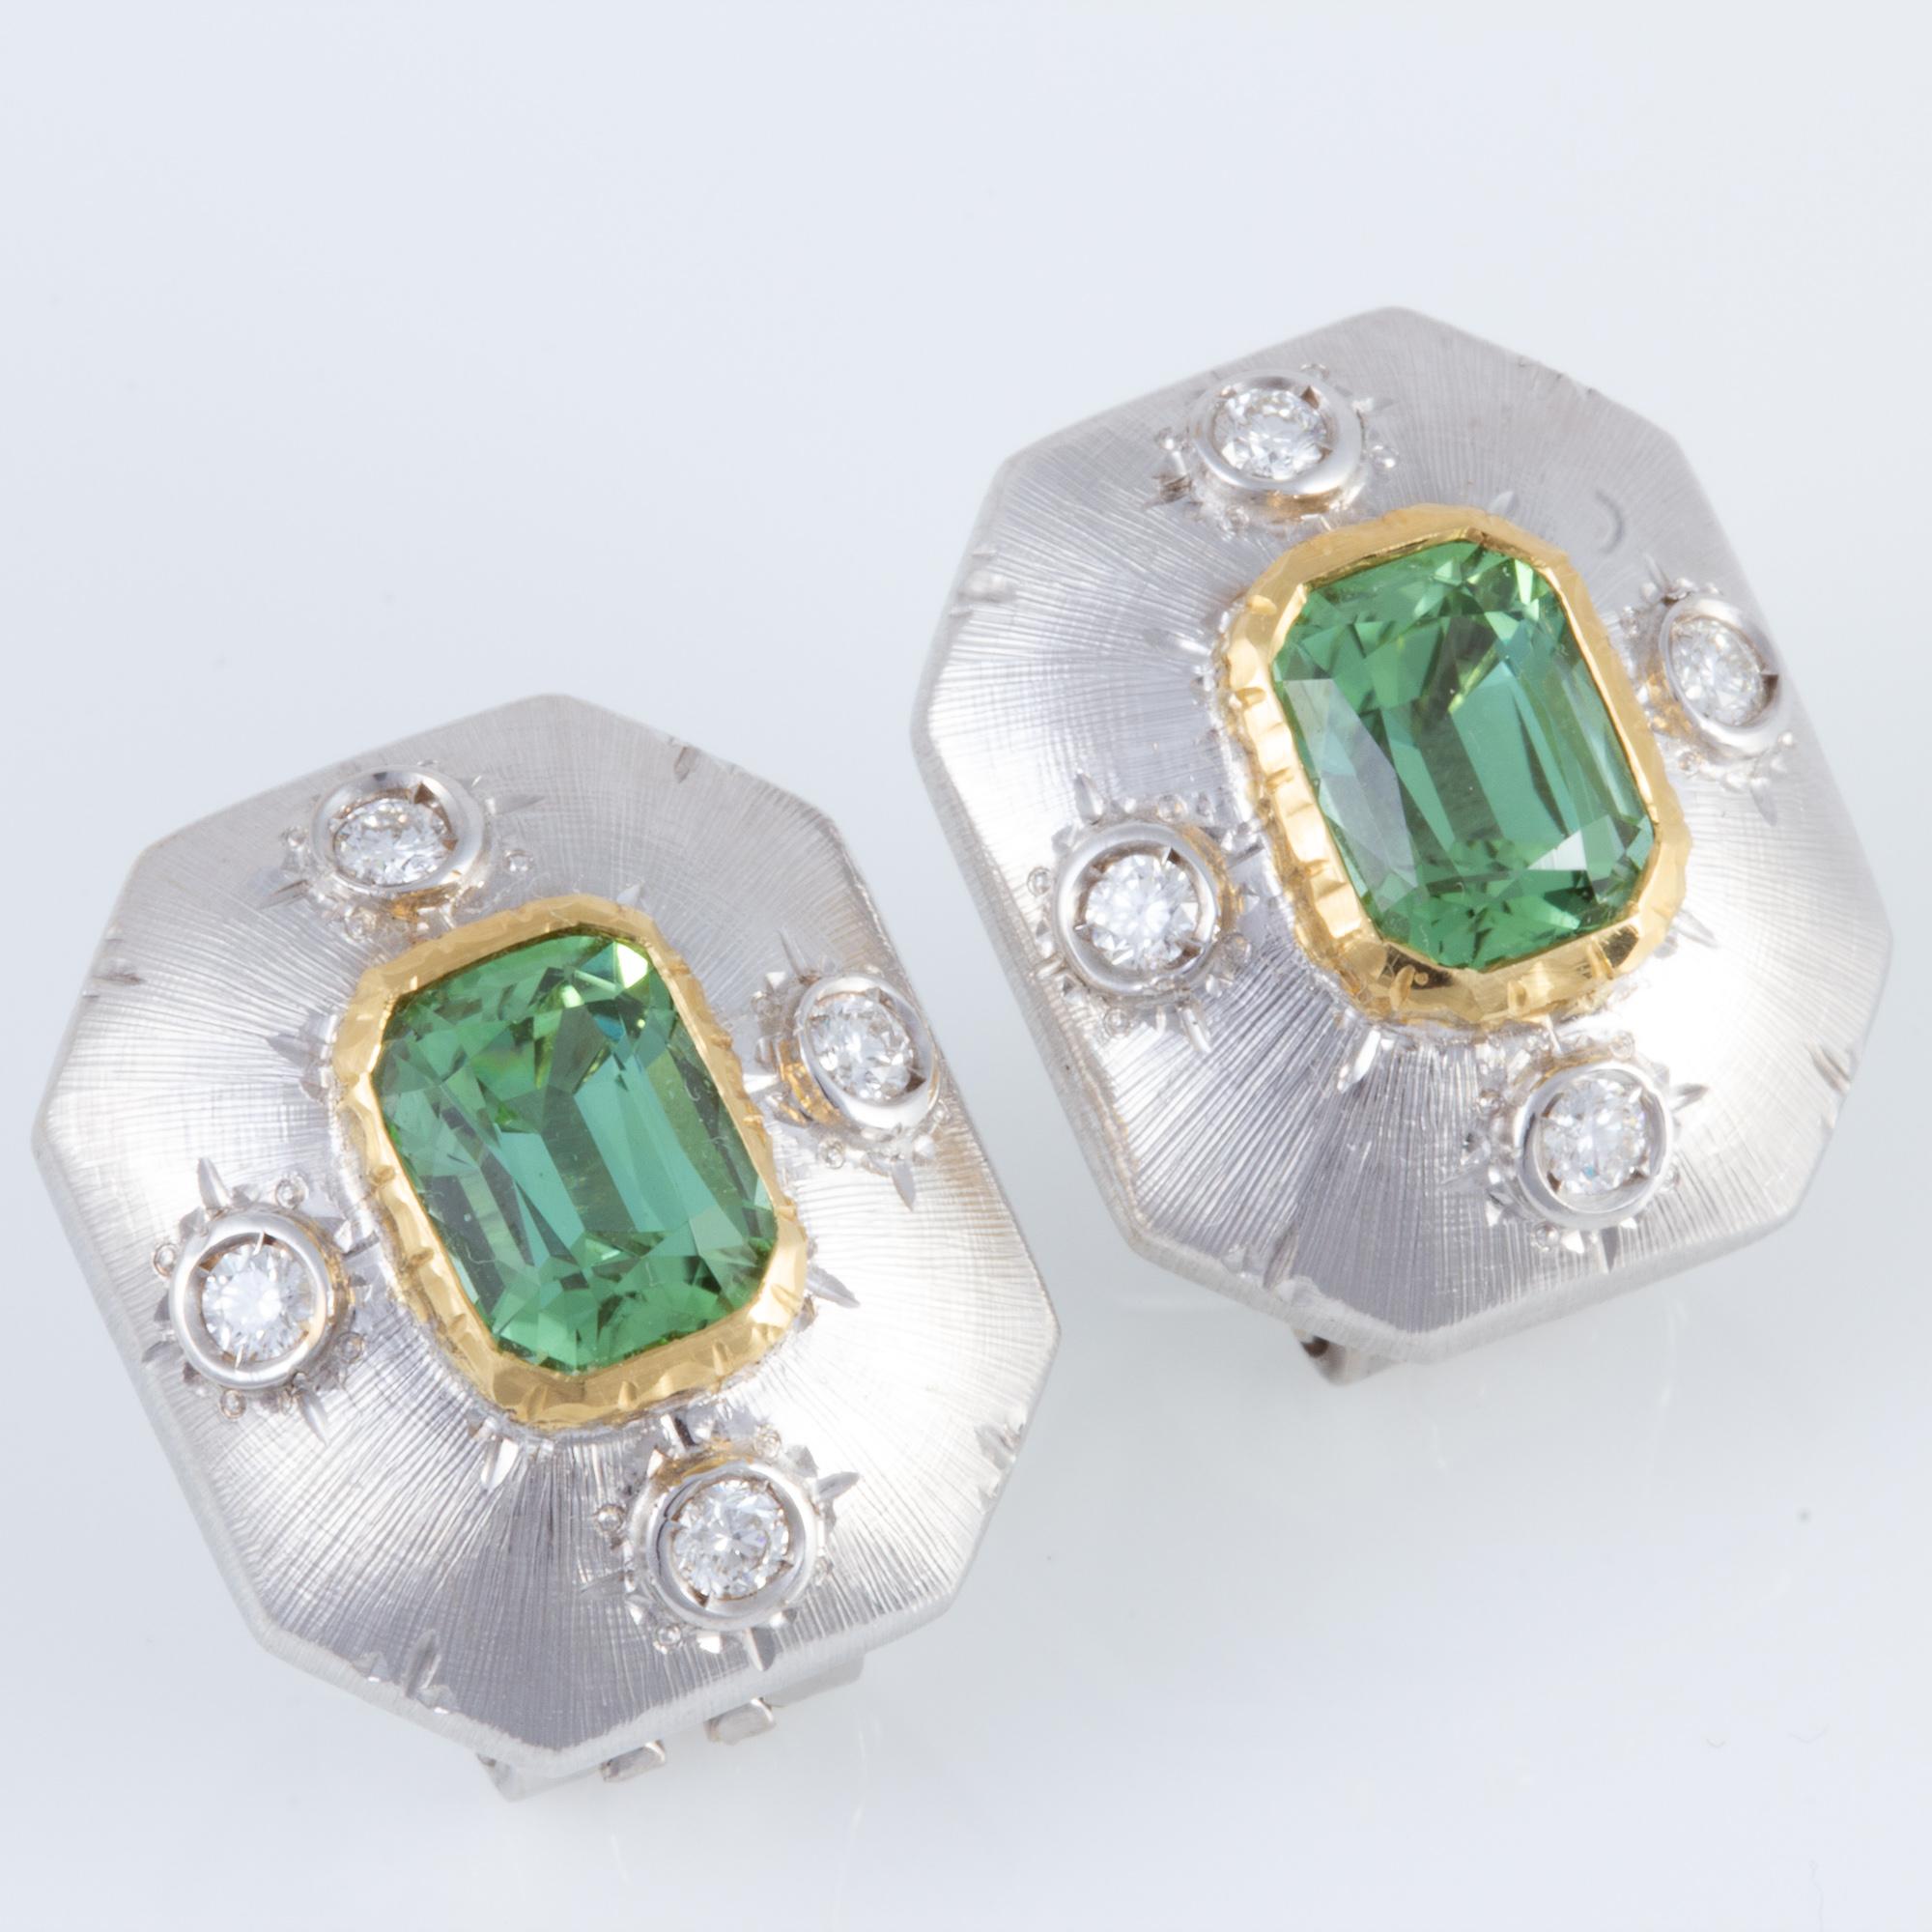 Handcrafted by Italian master jewelers in an old world Florentine style, these exquisite Tourmaline earrings are set in  beautifully hand engraved settings in two tone 18 kt gold.  This green  Tourmalines weigh 2.81 carats. The total diamond weight